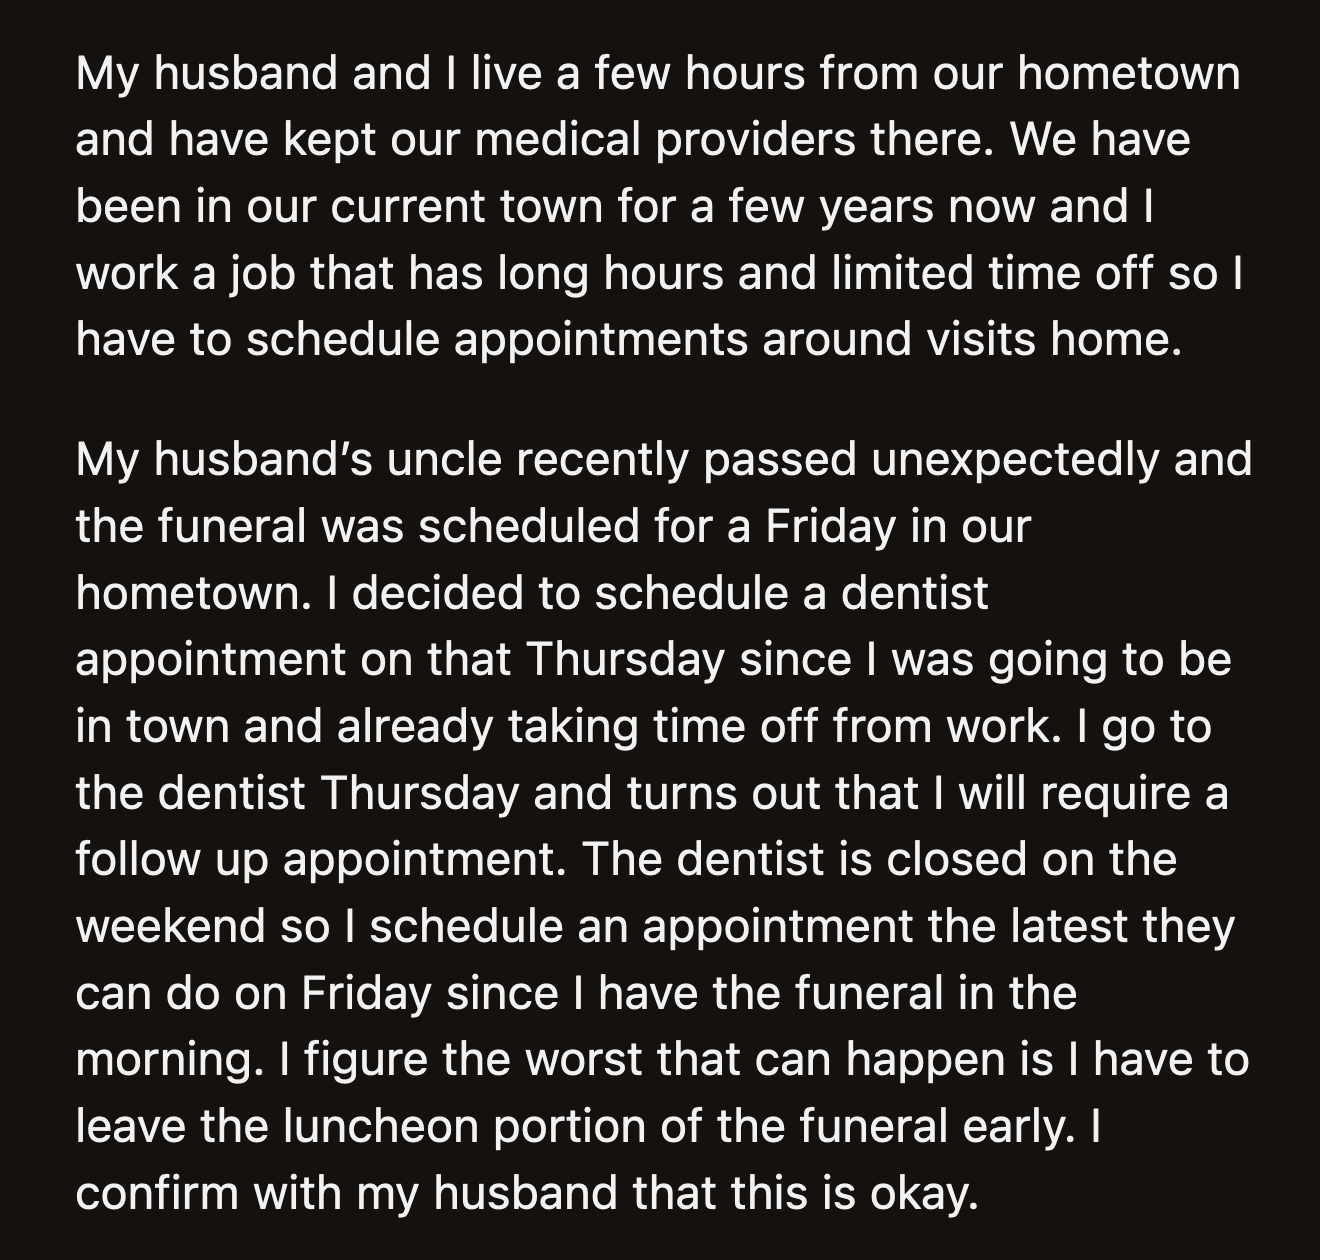 OP met their friend at the cemetery's entrance. They missed the burial but reached their appointment just in time.